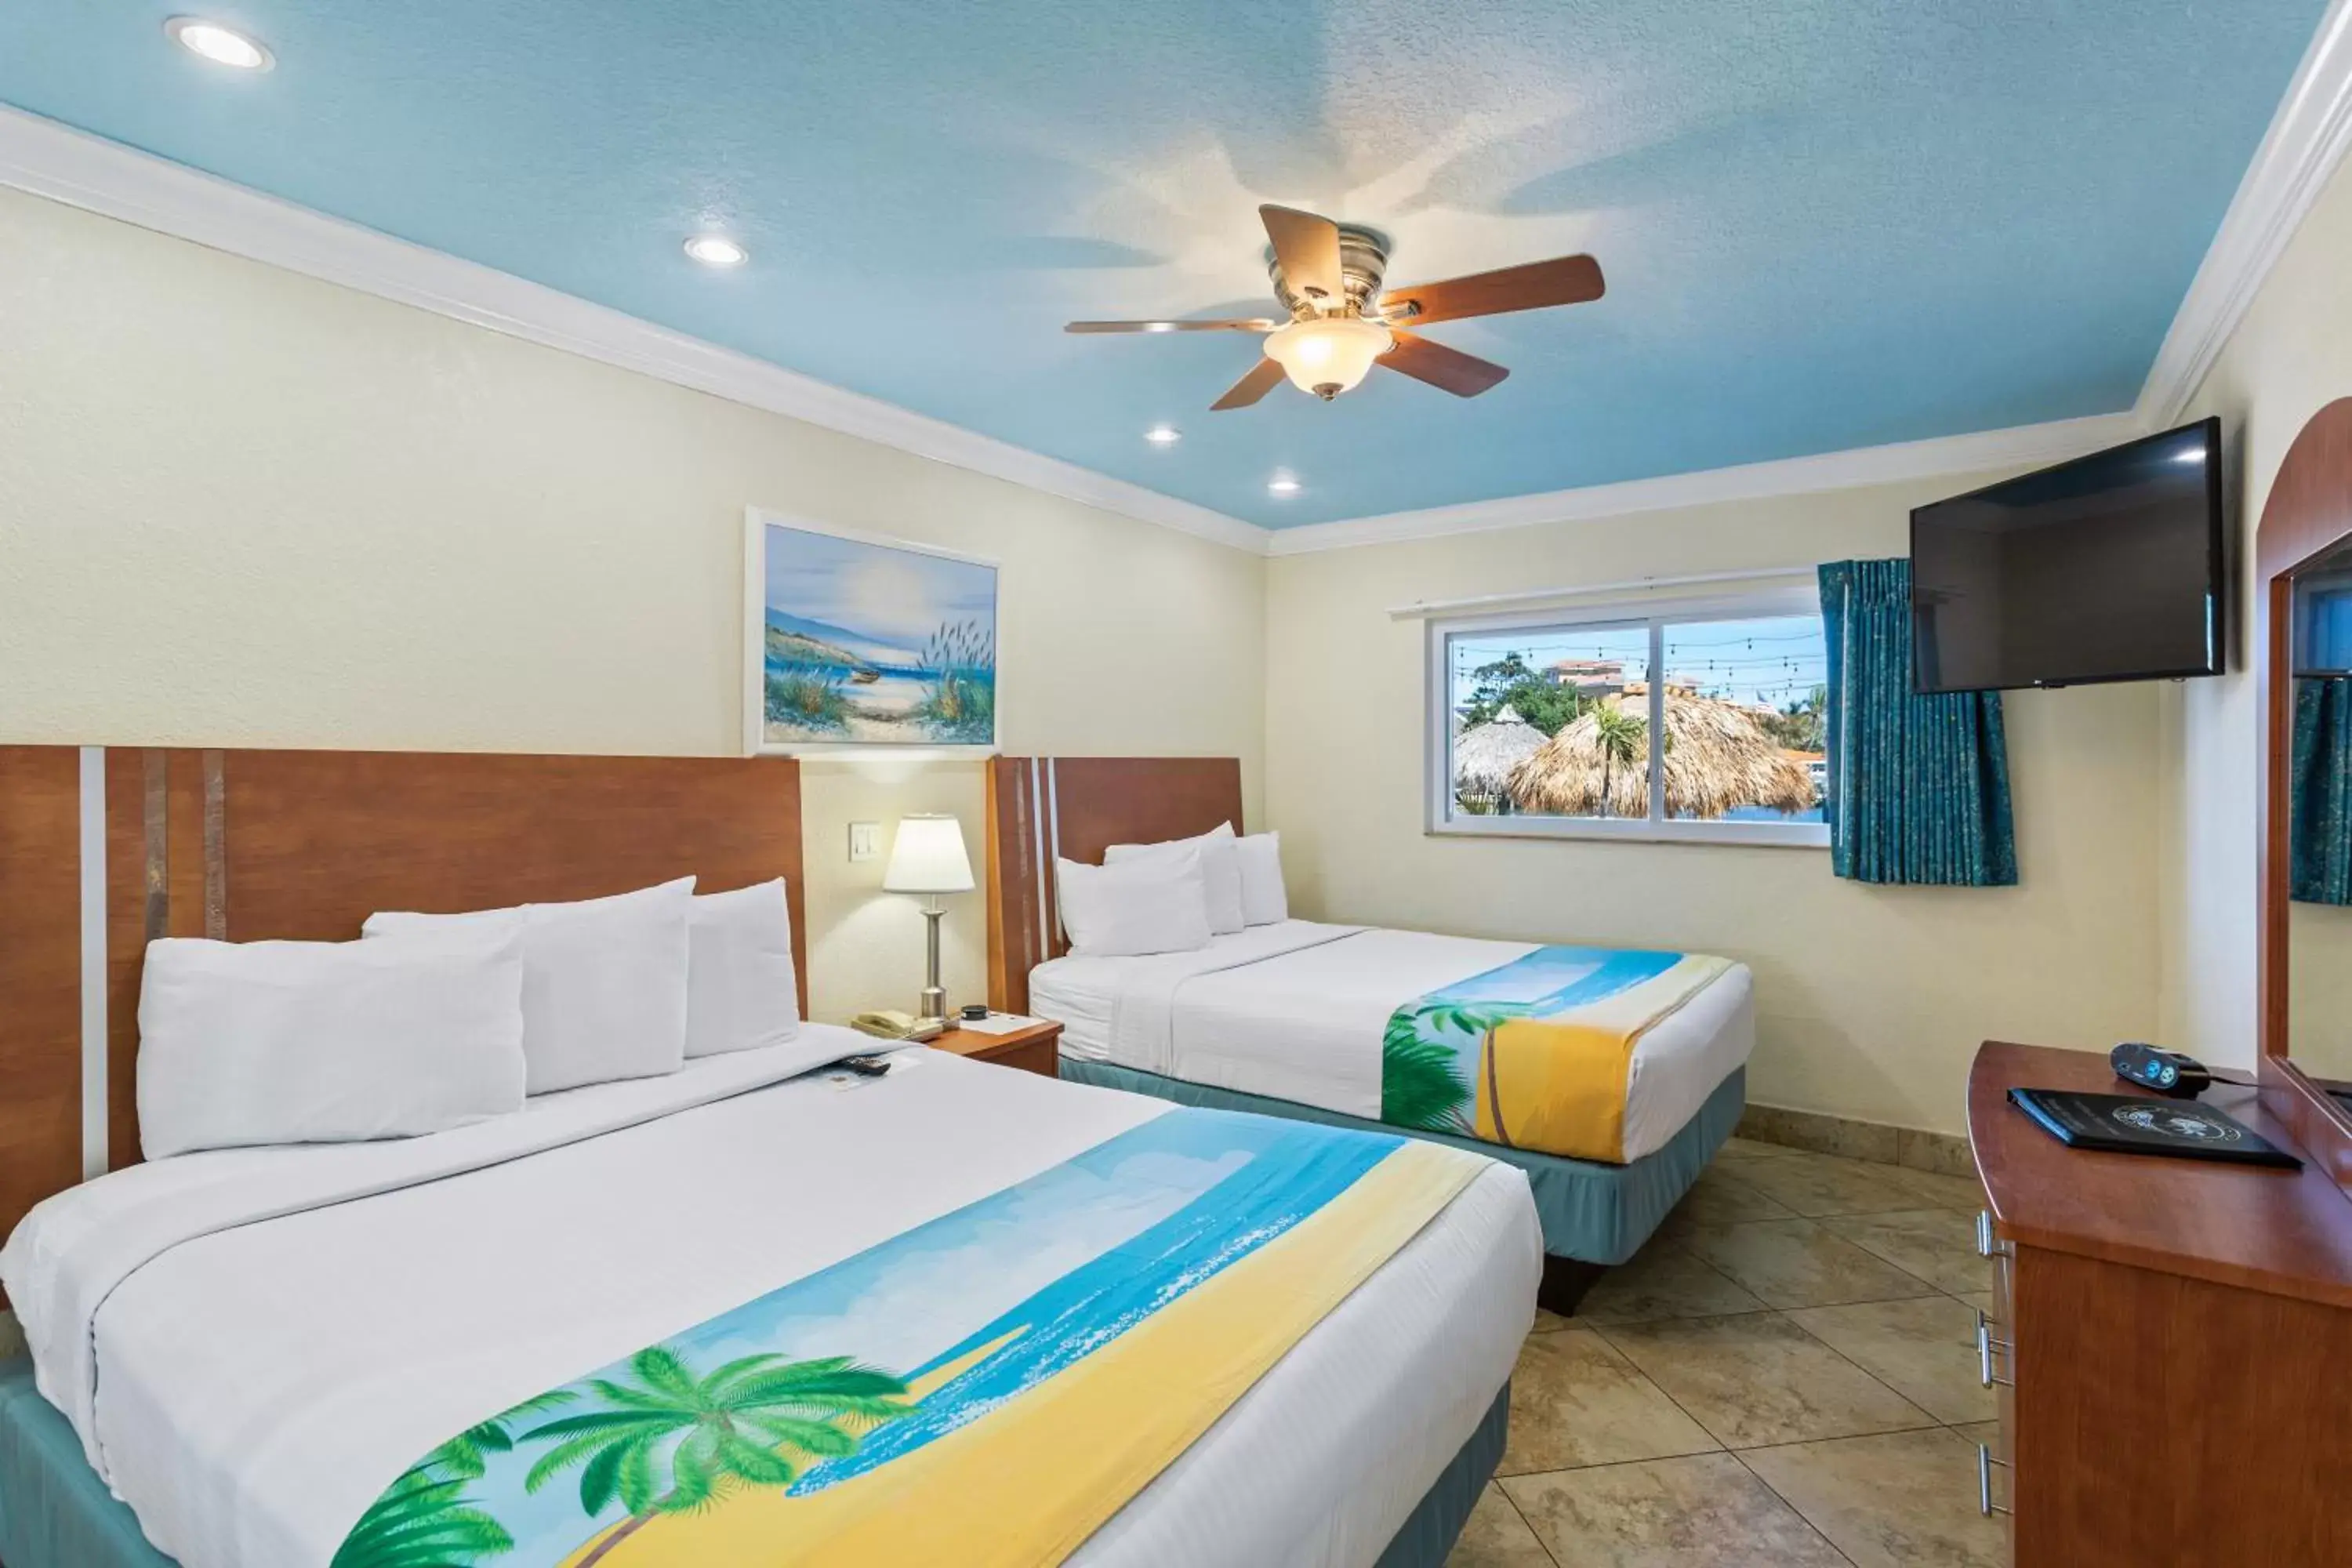 Deluxe One Bedroom Suite: 2 Queen Beds and 1 Sleeper Sofa in Bay Palms Waterfront Resort - Hotel and Marina